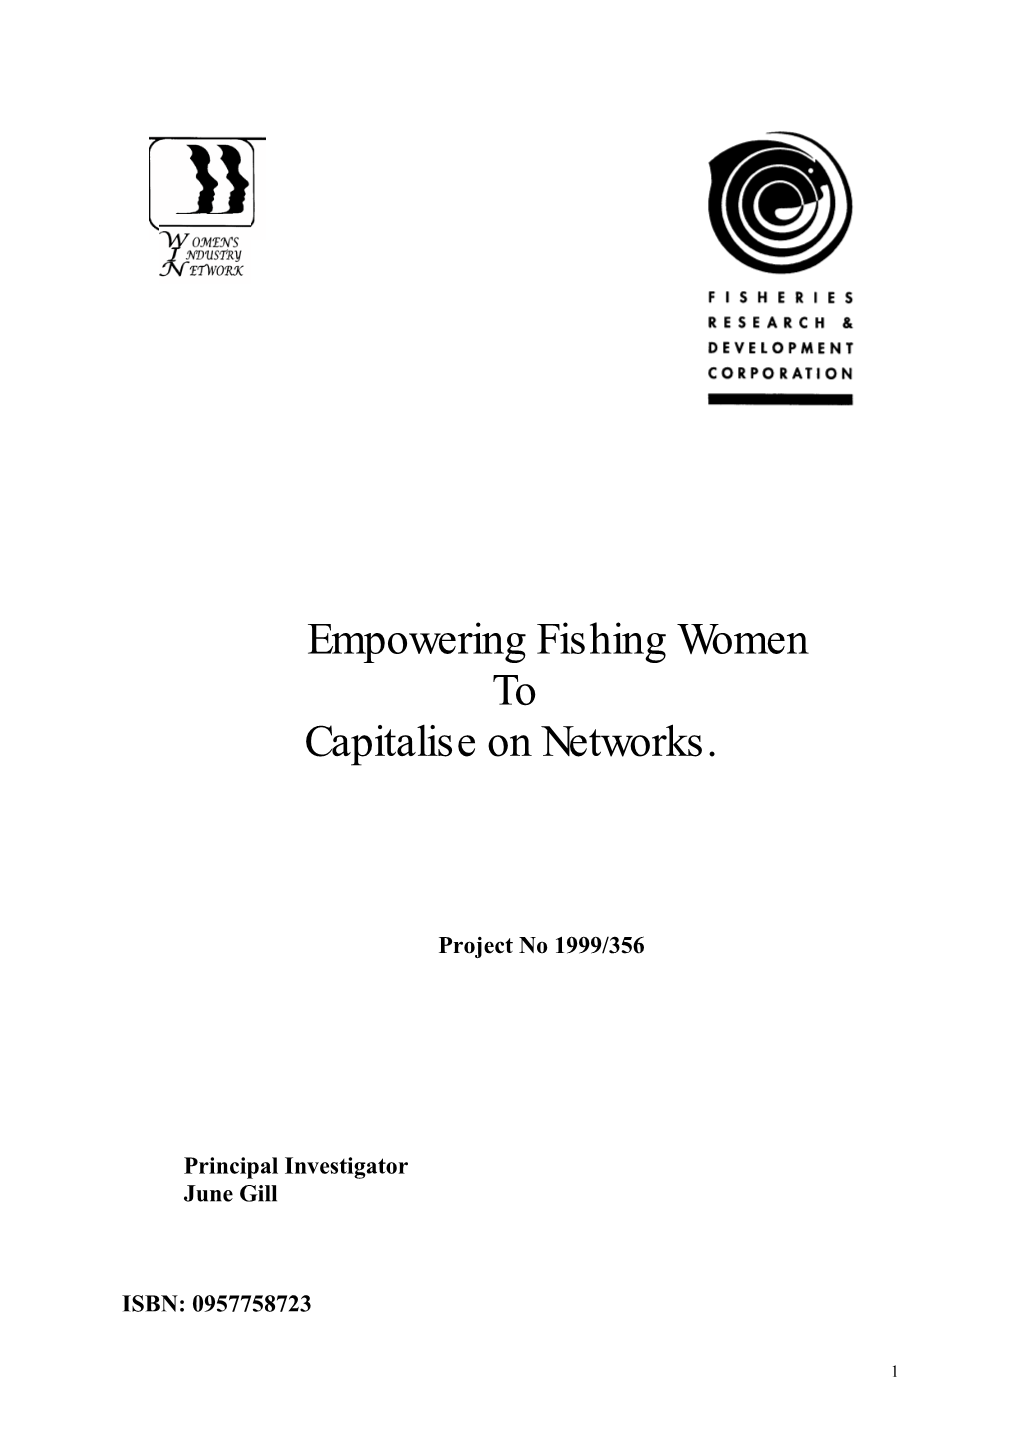 Empowering Fishing Women to Capitalise on Networks